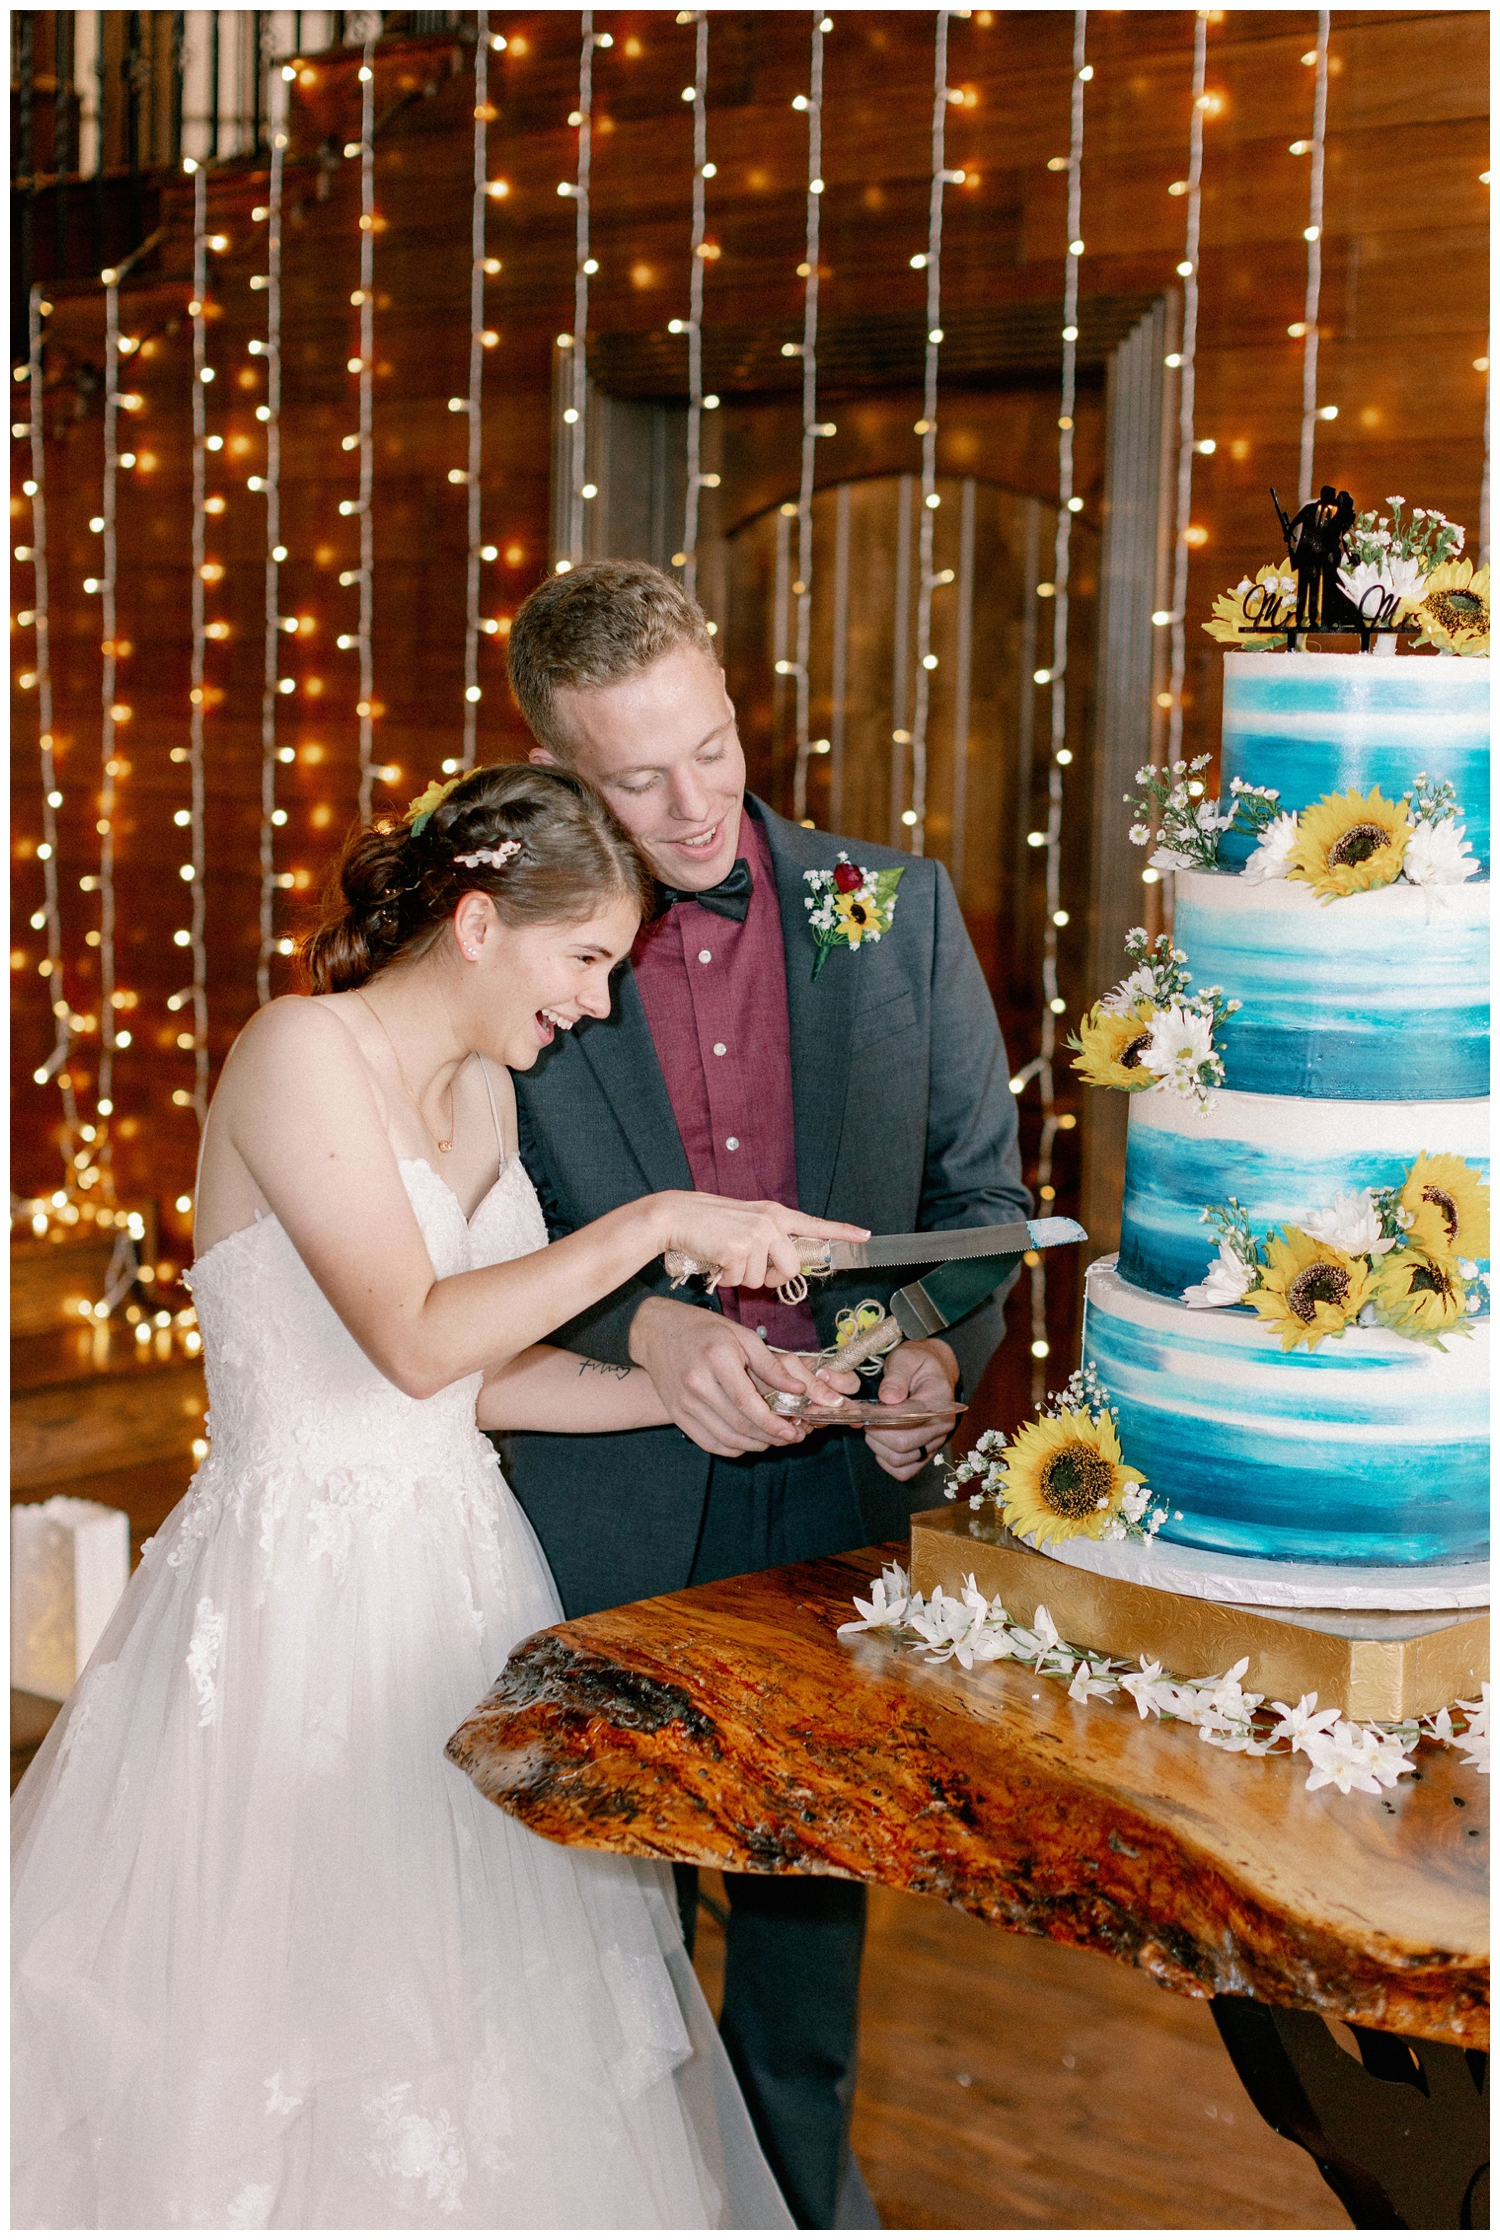 bride and groom cake cutting The Oaks at the Oak Plantation wedding reception